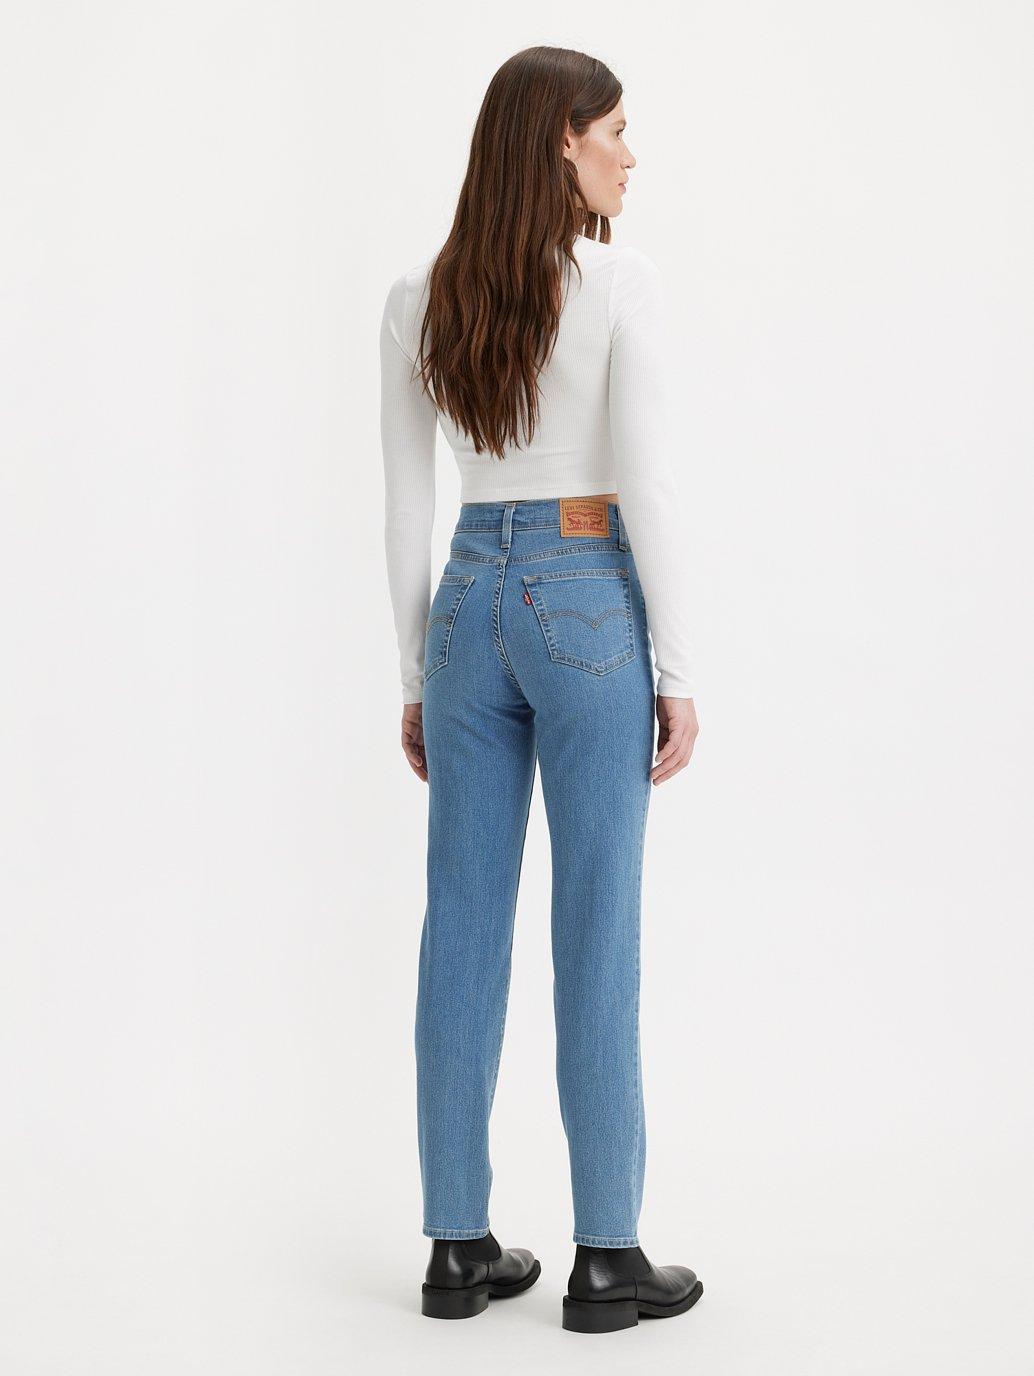 Buy Levi's® Women's 724 High-Rise Straight Cropped Jeans | Levi’s ...